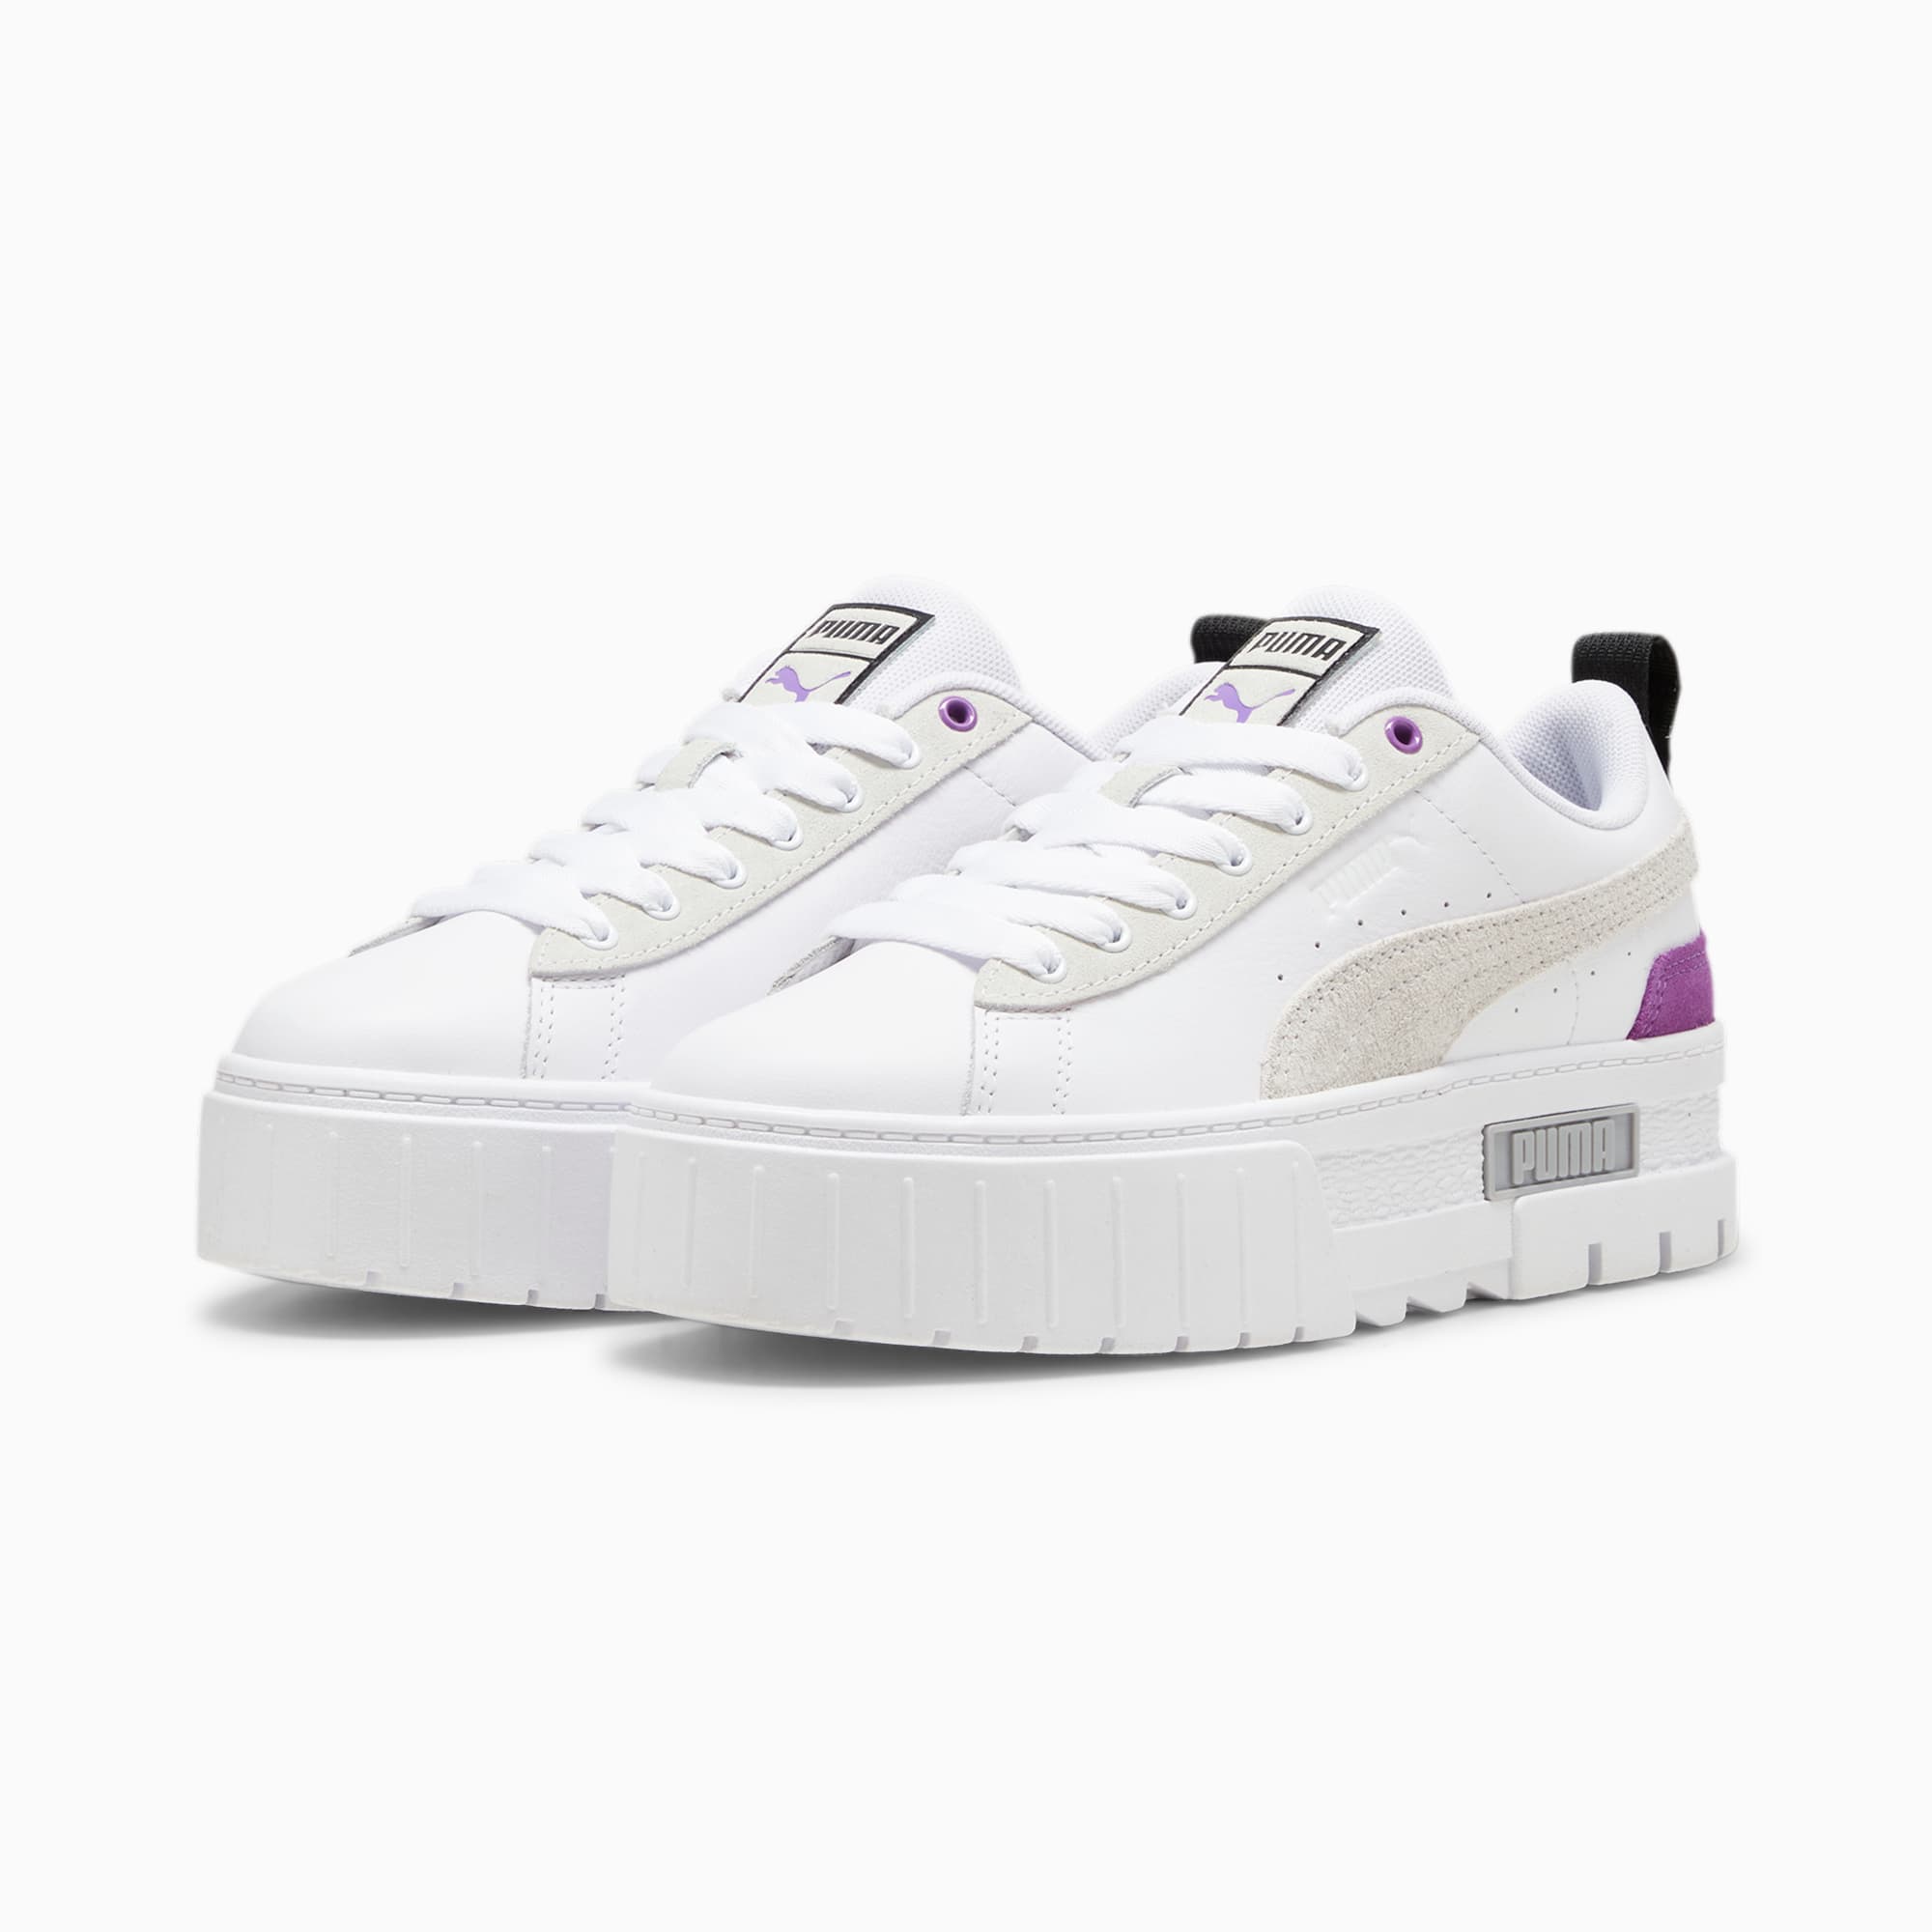 PUMA Mayze Mix Women's Sneakers, White/Ultraviolet, Size 35,5, Shoes